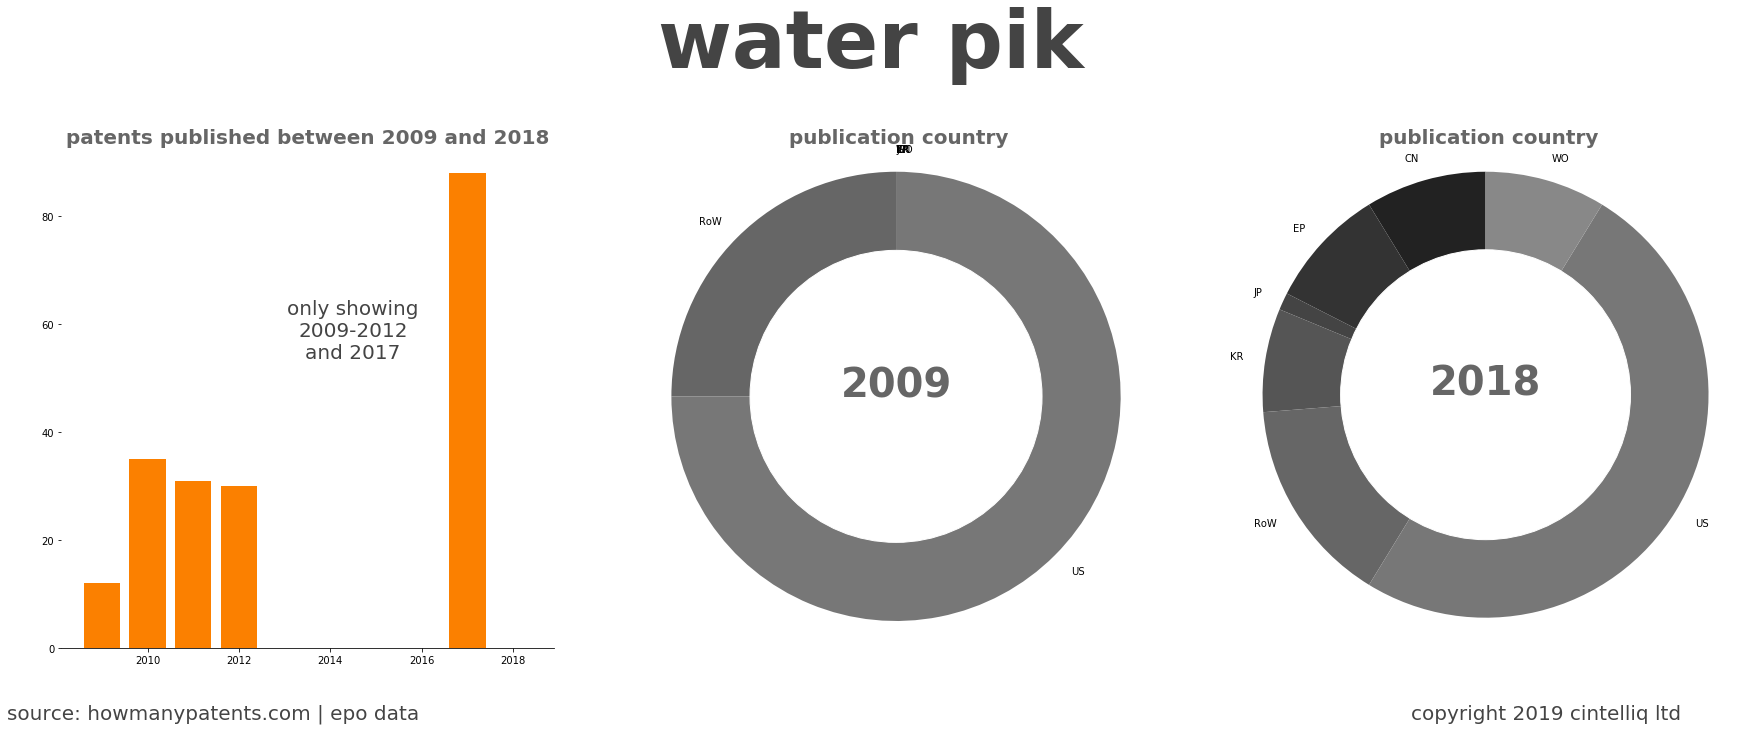 summary of patents for Water Pik